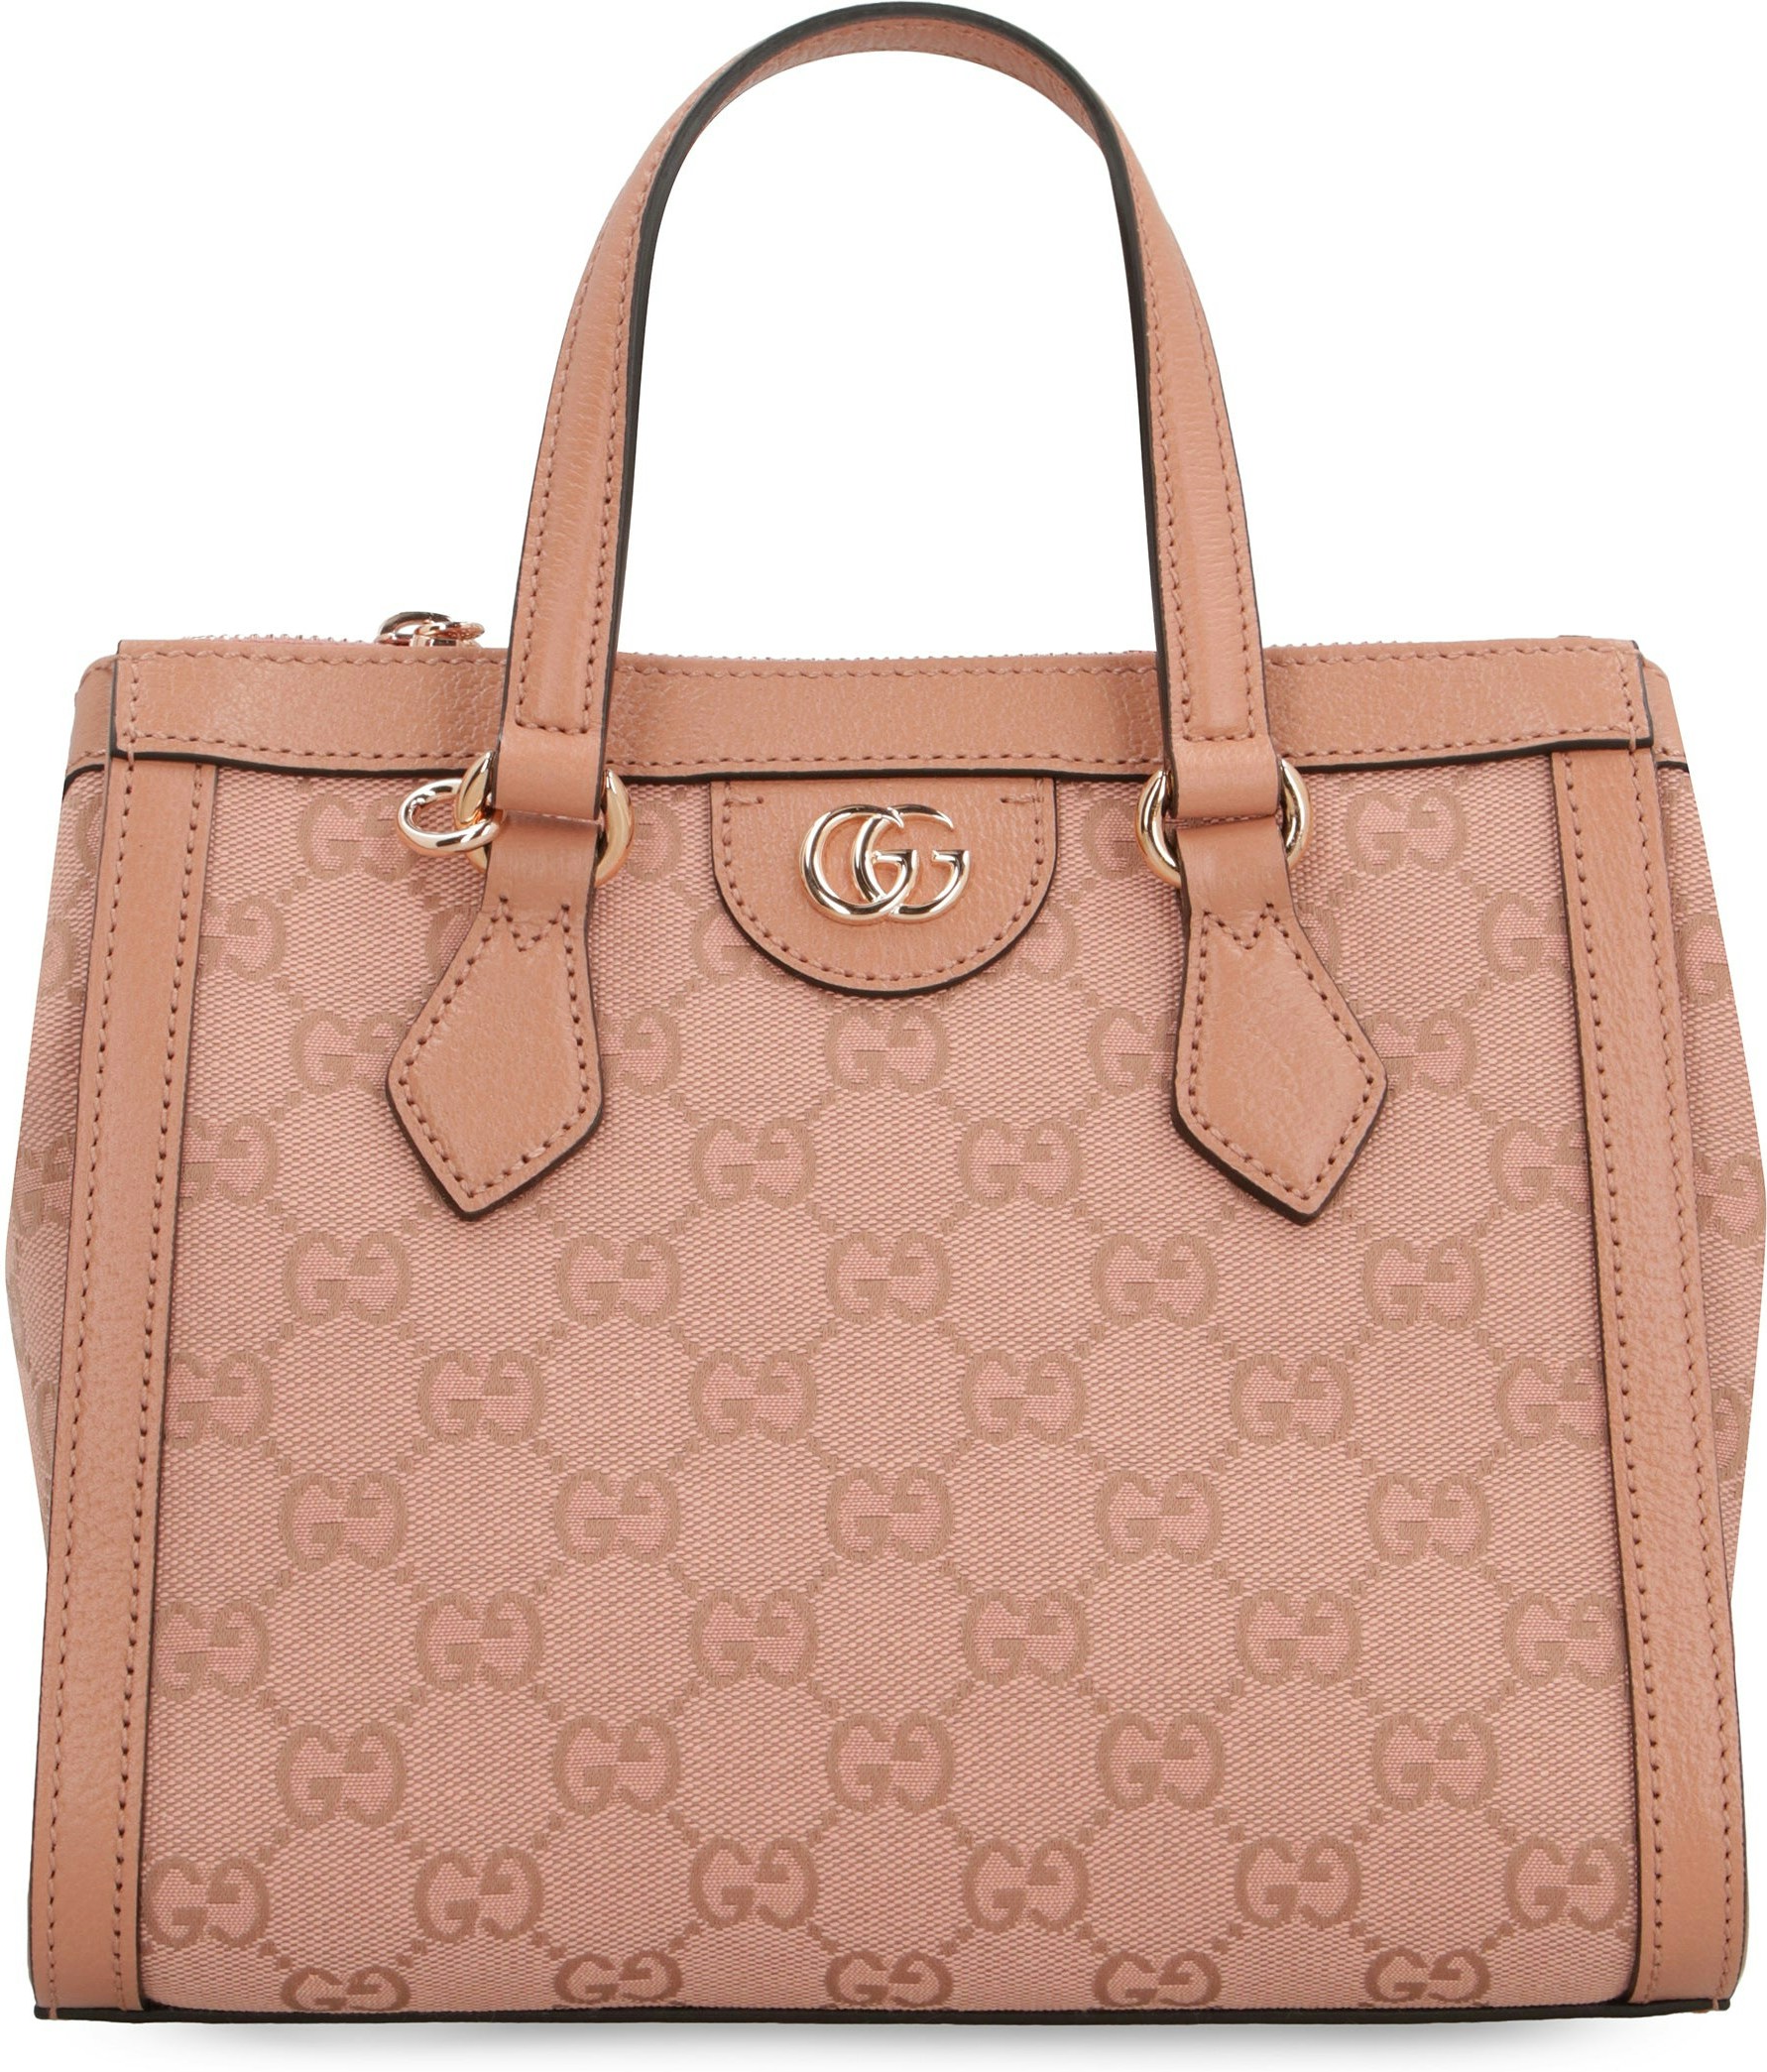 Gucci Ophidia GG Large Tote Bag Pink - Kaialux